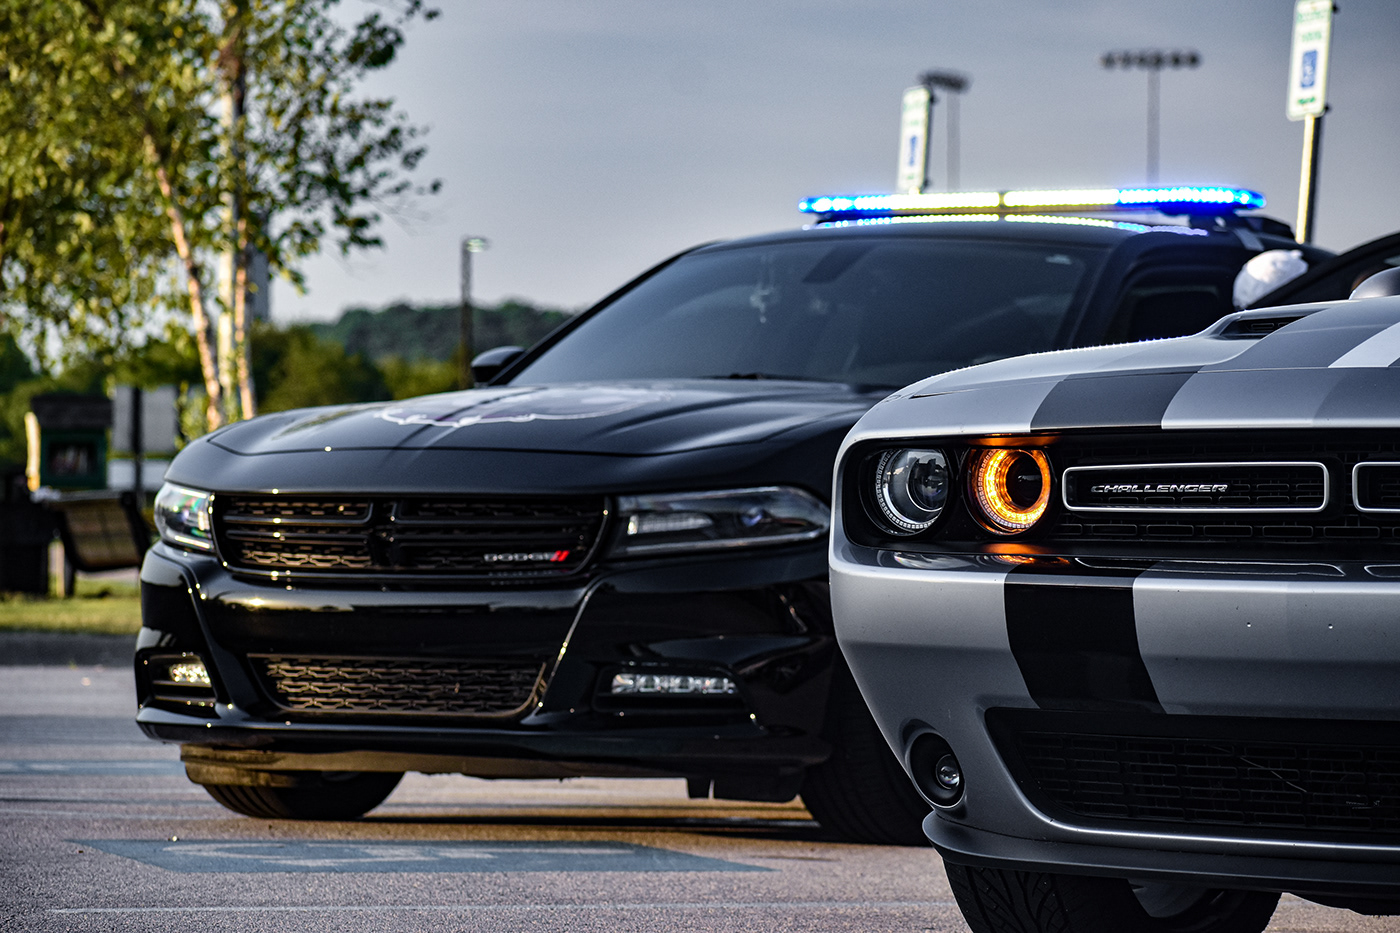 police first responders Emergency Vehicles law enforcement charger Photography  photoshoot